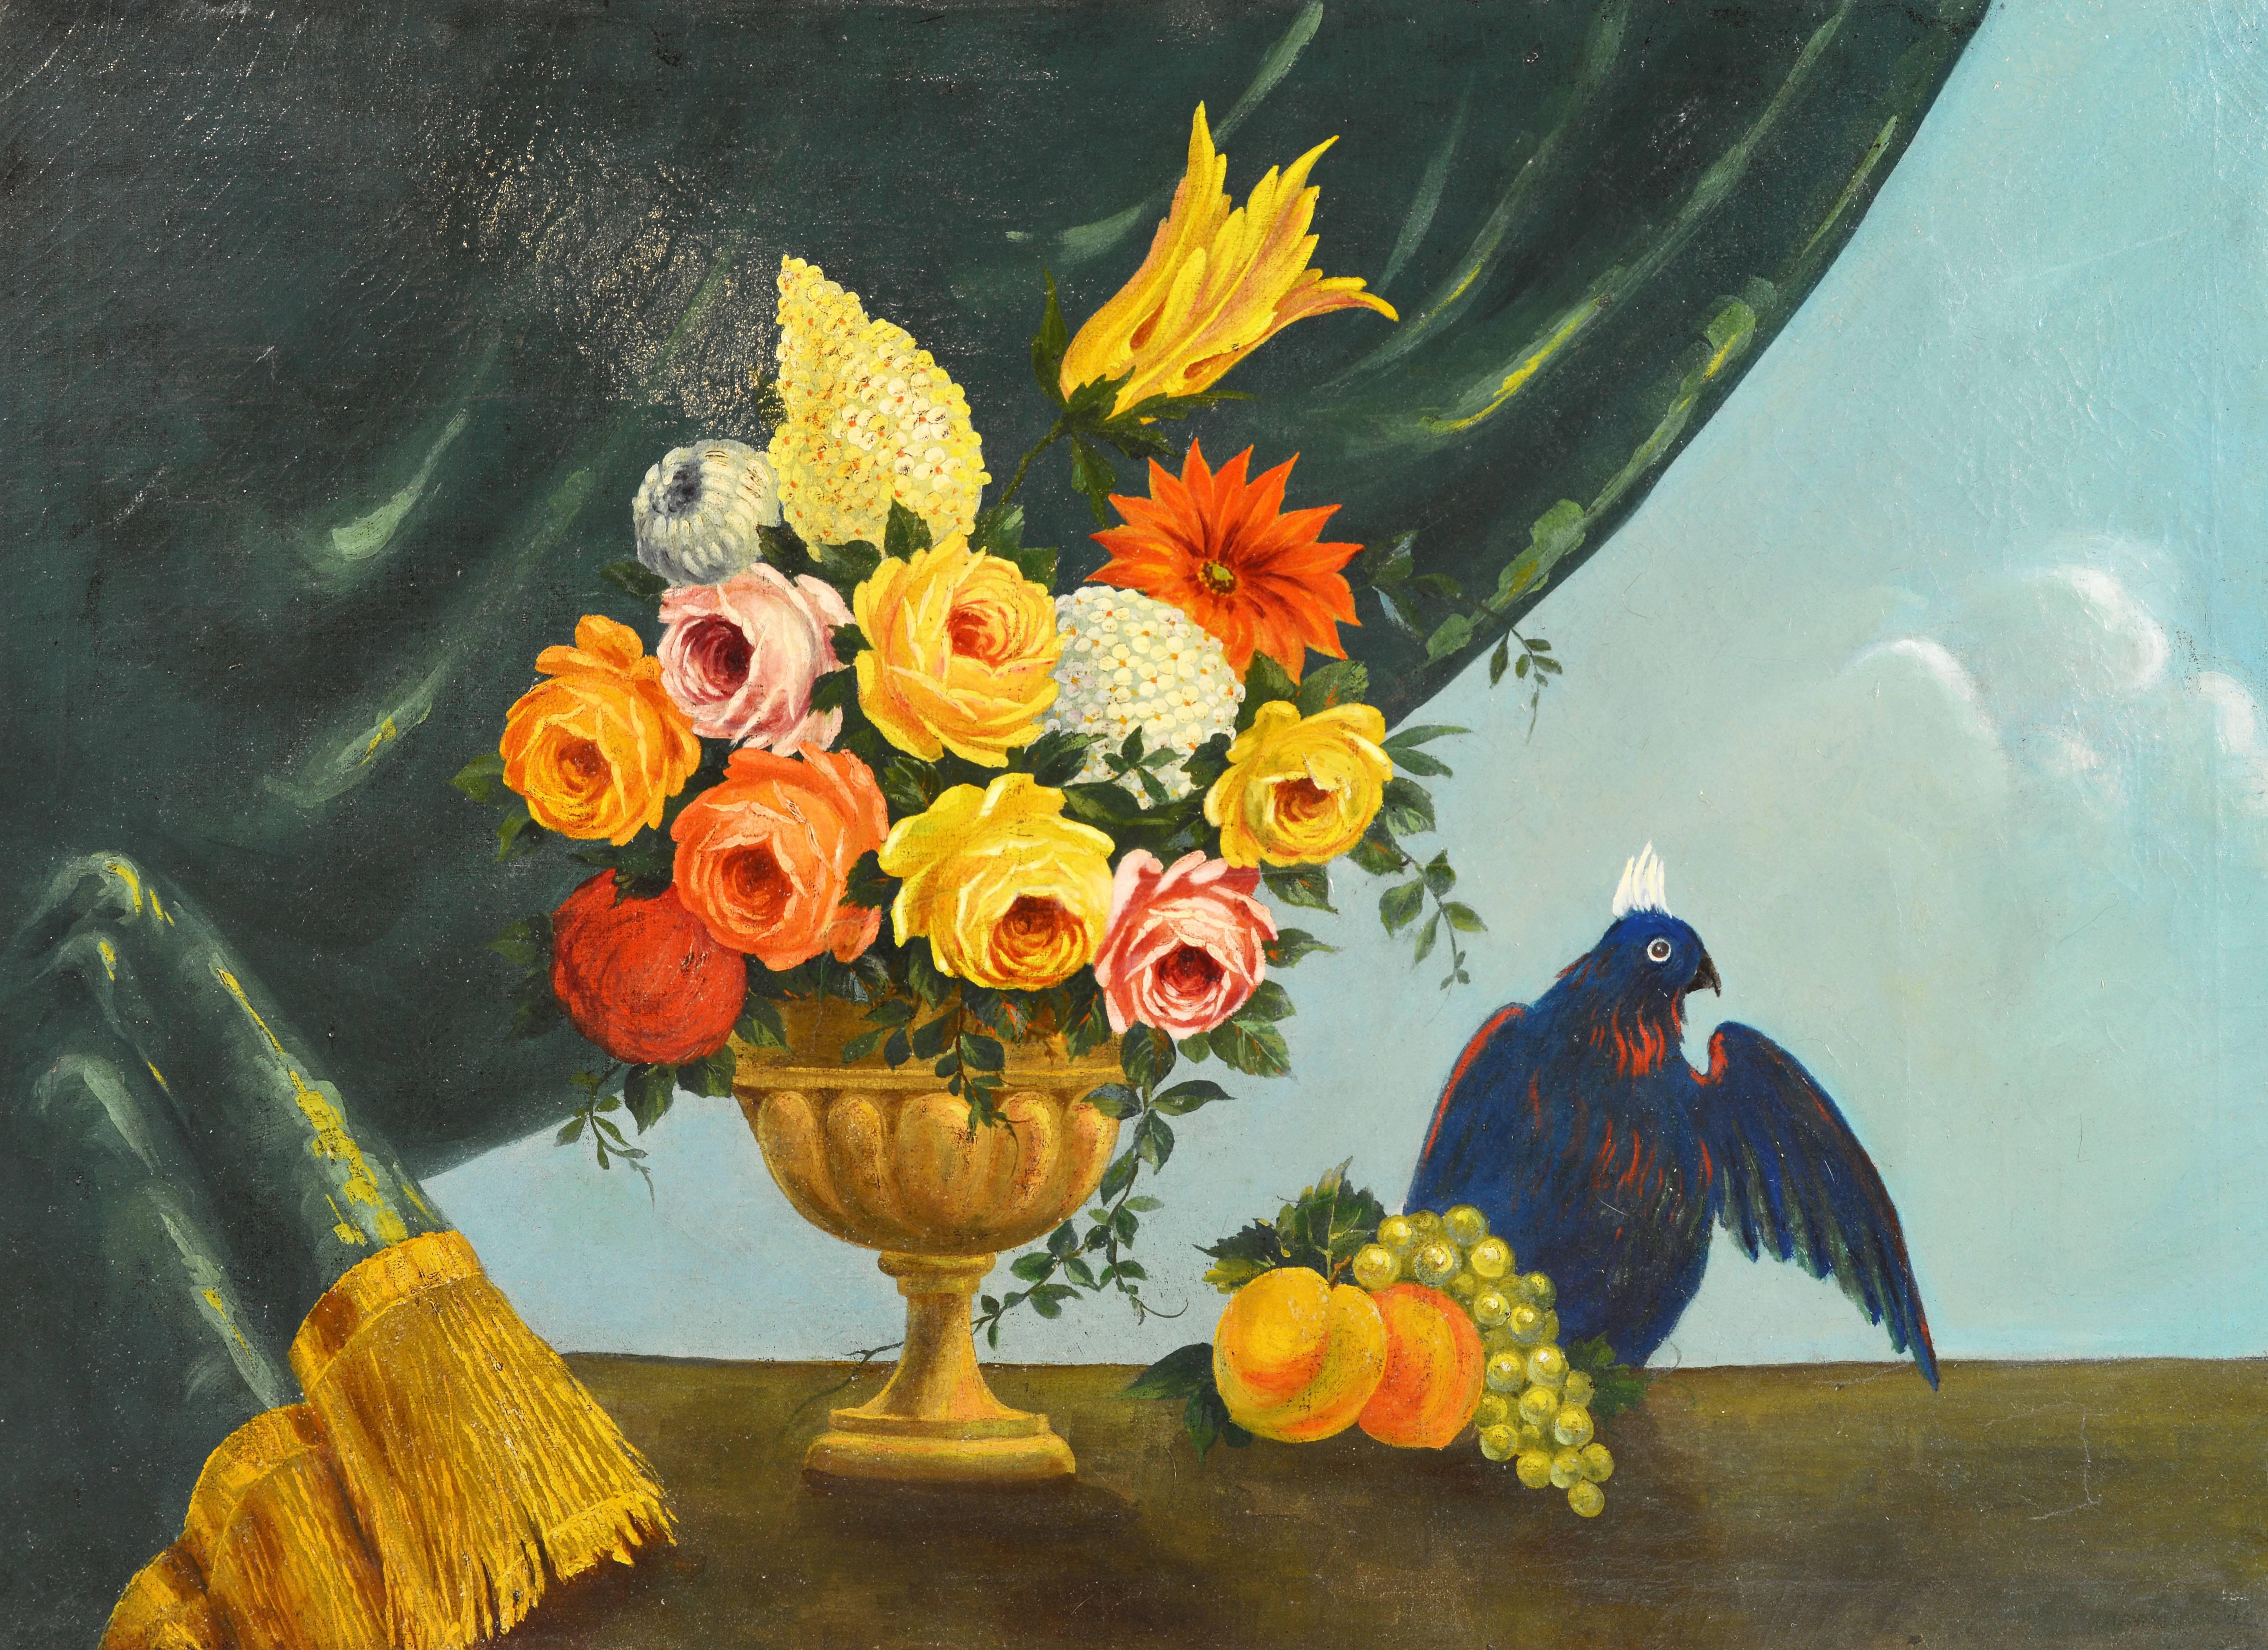 This large and colorful painting, likely dating to the late 18th or early 19th century, features a stunning bouquet of flowers set in a classical urn complimented by a background of gold trimmed draping and the blue sky. What makes the painting so